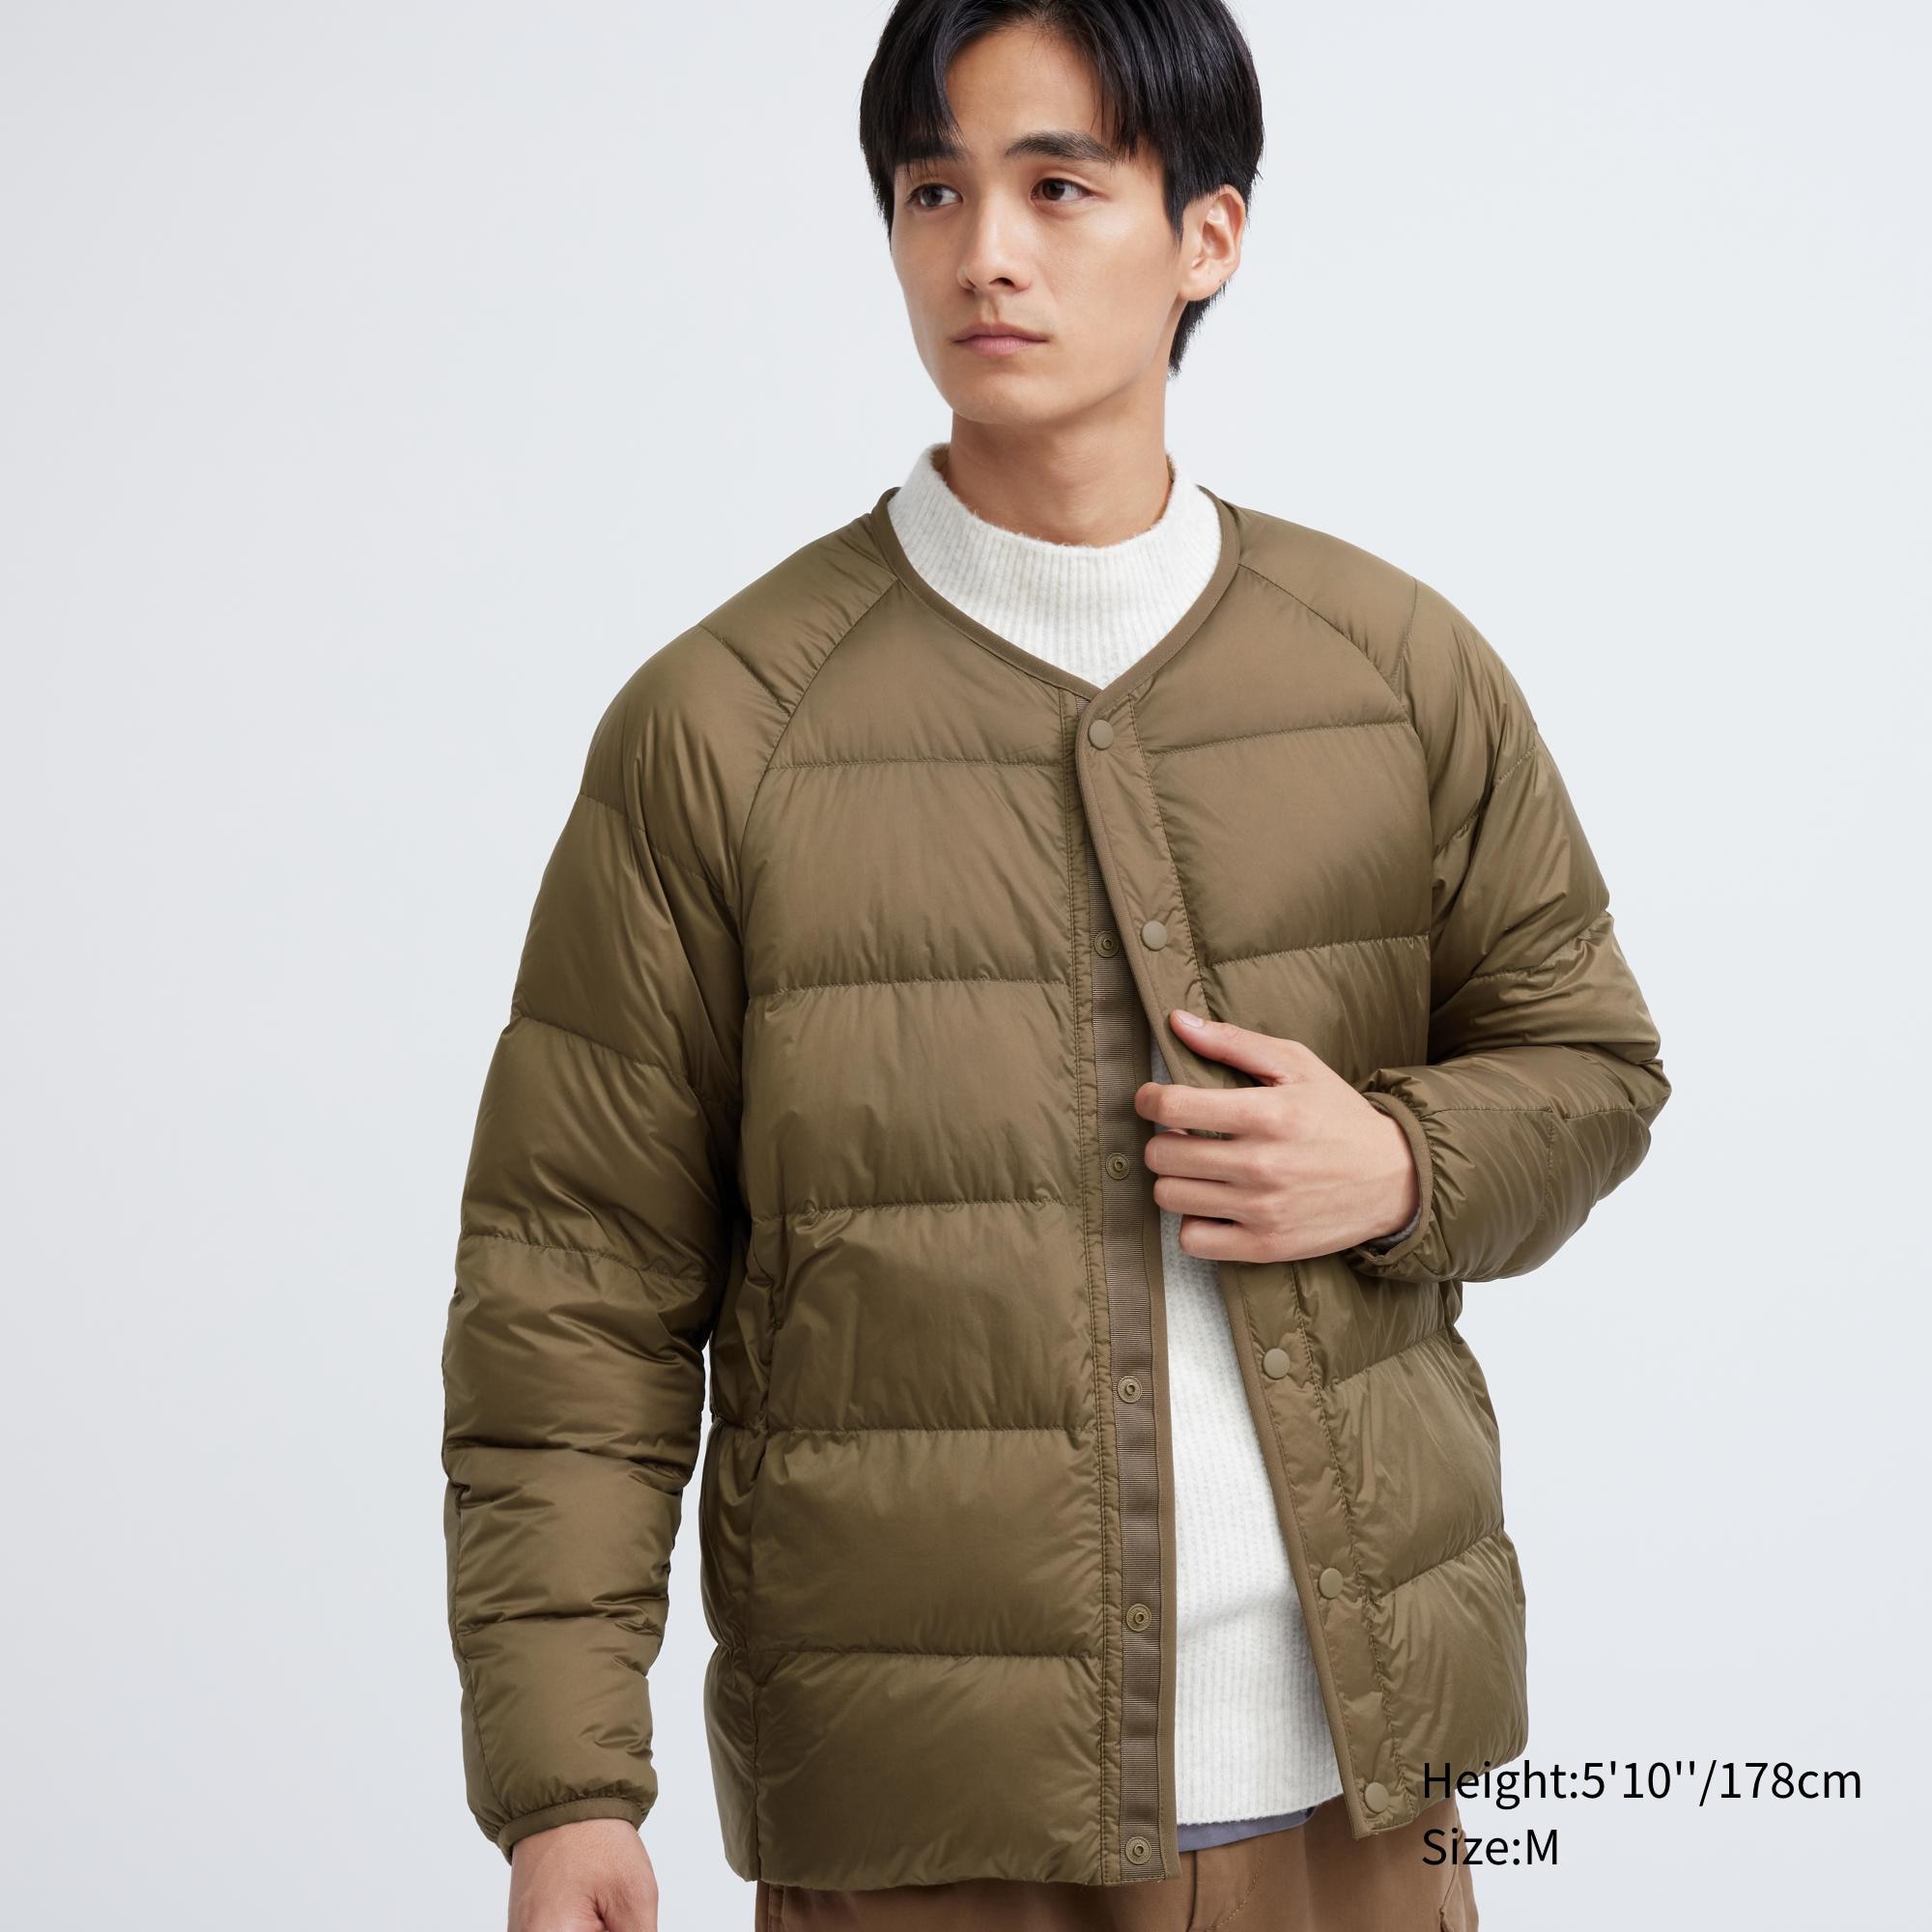 Uniqlo Ultra Light Down Short Puffer Jacket  6 Major Coat Trends Thatll  Become Your GoTo Looks This Winter  POPSUGAR Fashion Photo 6